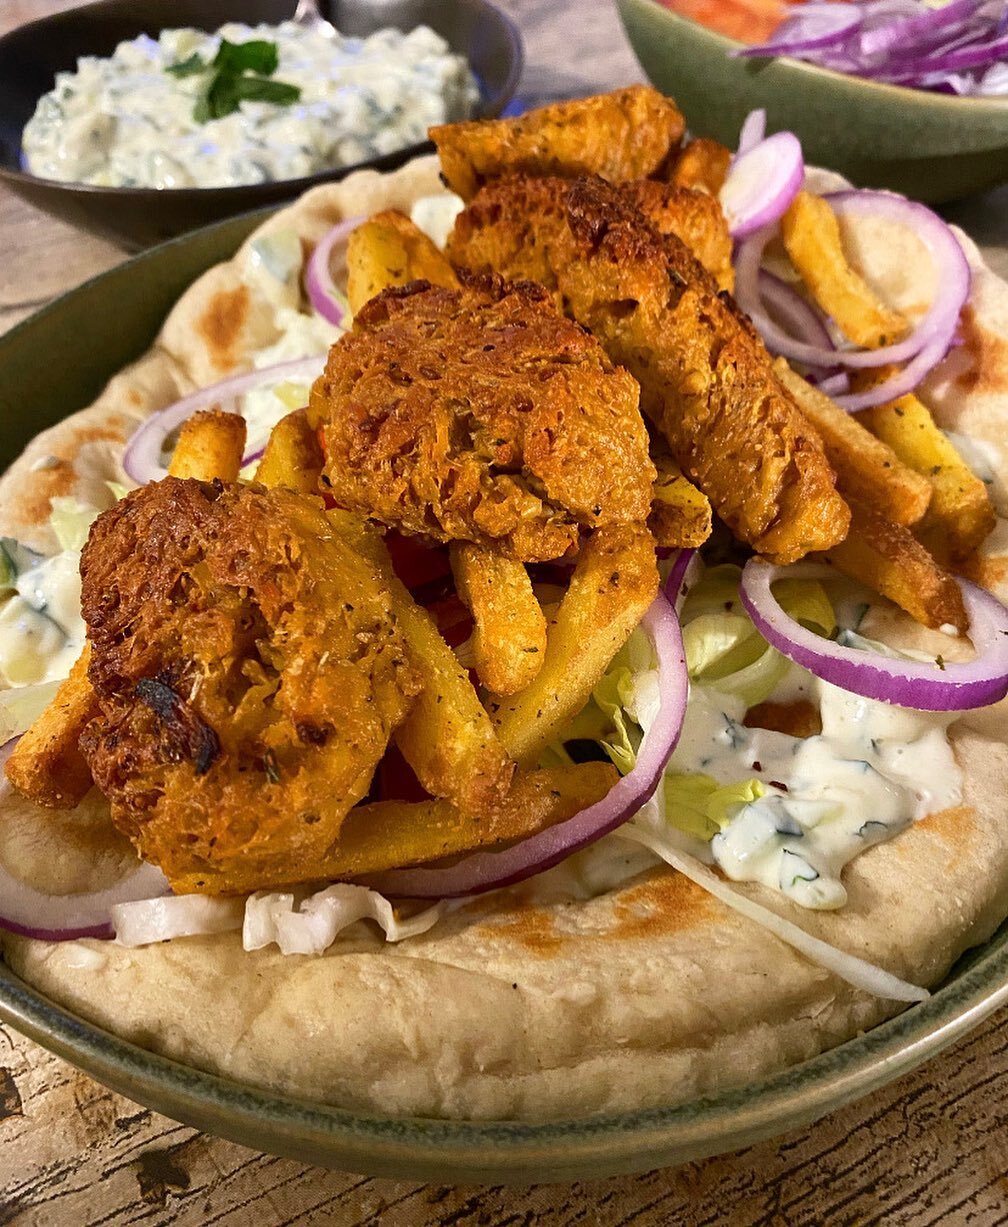 Vegan gyros: check out this tempeh-seitan mash up! Save for the ingredients- for full recipe (and more!) sign up to our newsletter on our website 🎉 🍽 

Ingredients:
Tempeh &ldquo;chicken&rdquo; pieces:
● 200g tempeh meades traditional soya bean tem